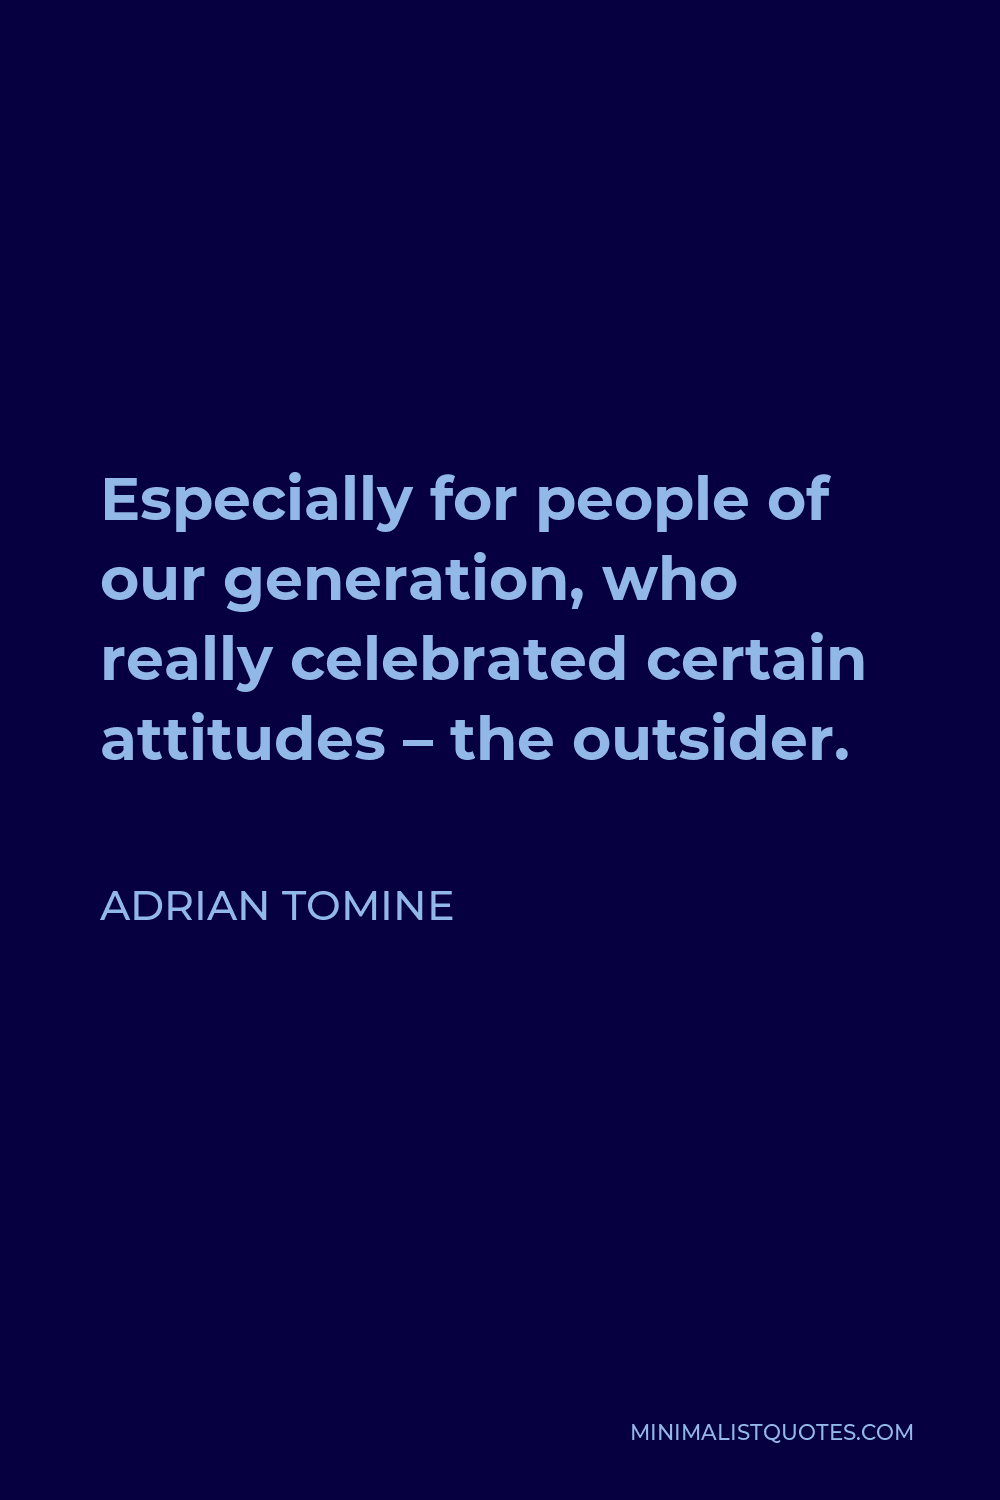 Adrian Tomine Quote - Especially for people of our generation, who really celebrated certain attitudes – the outsider.